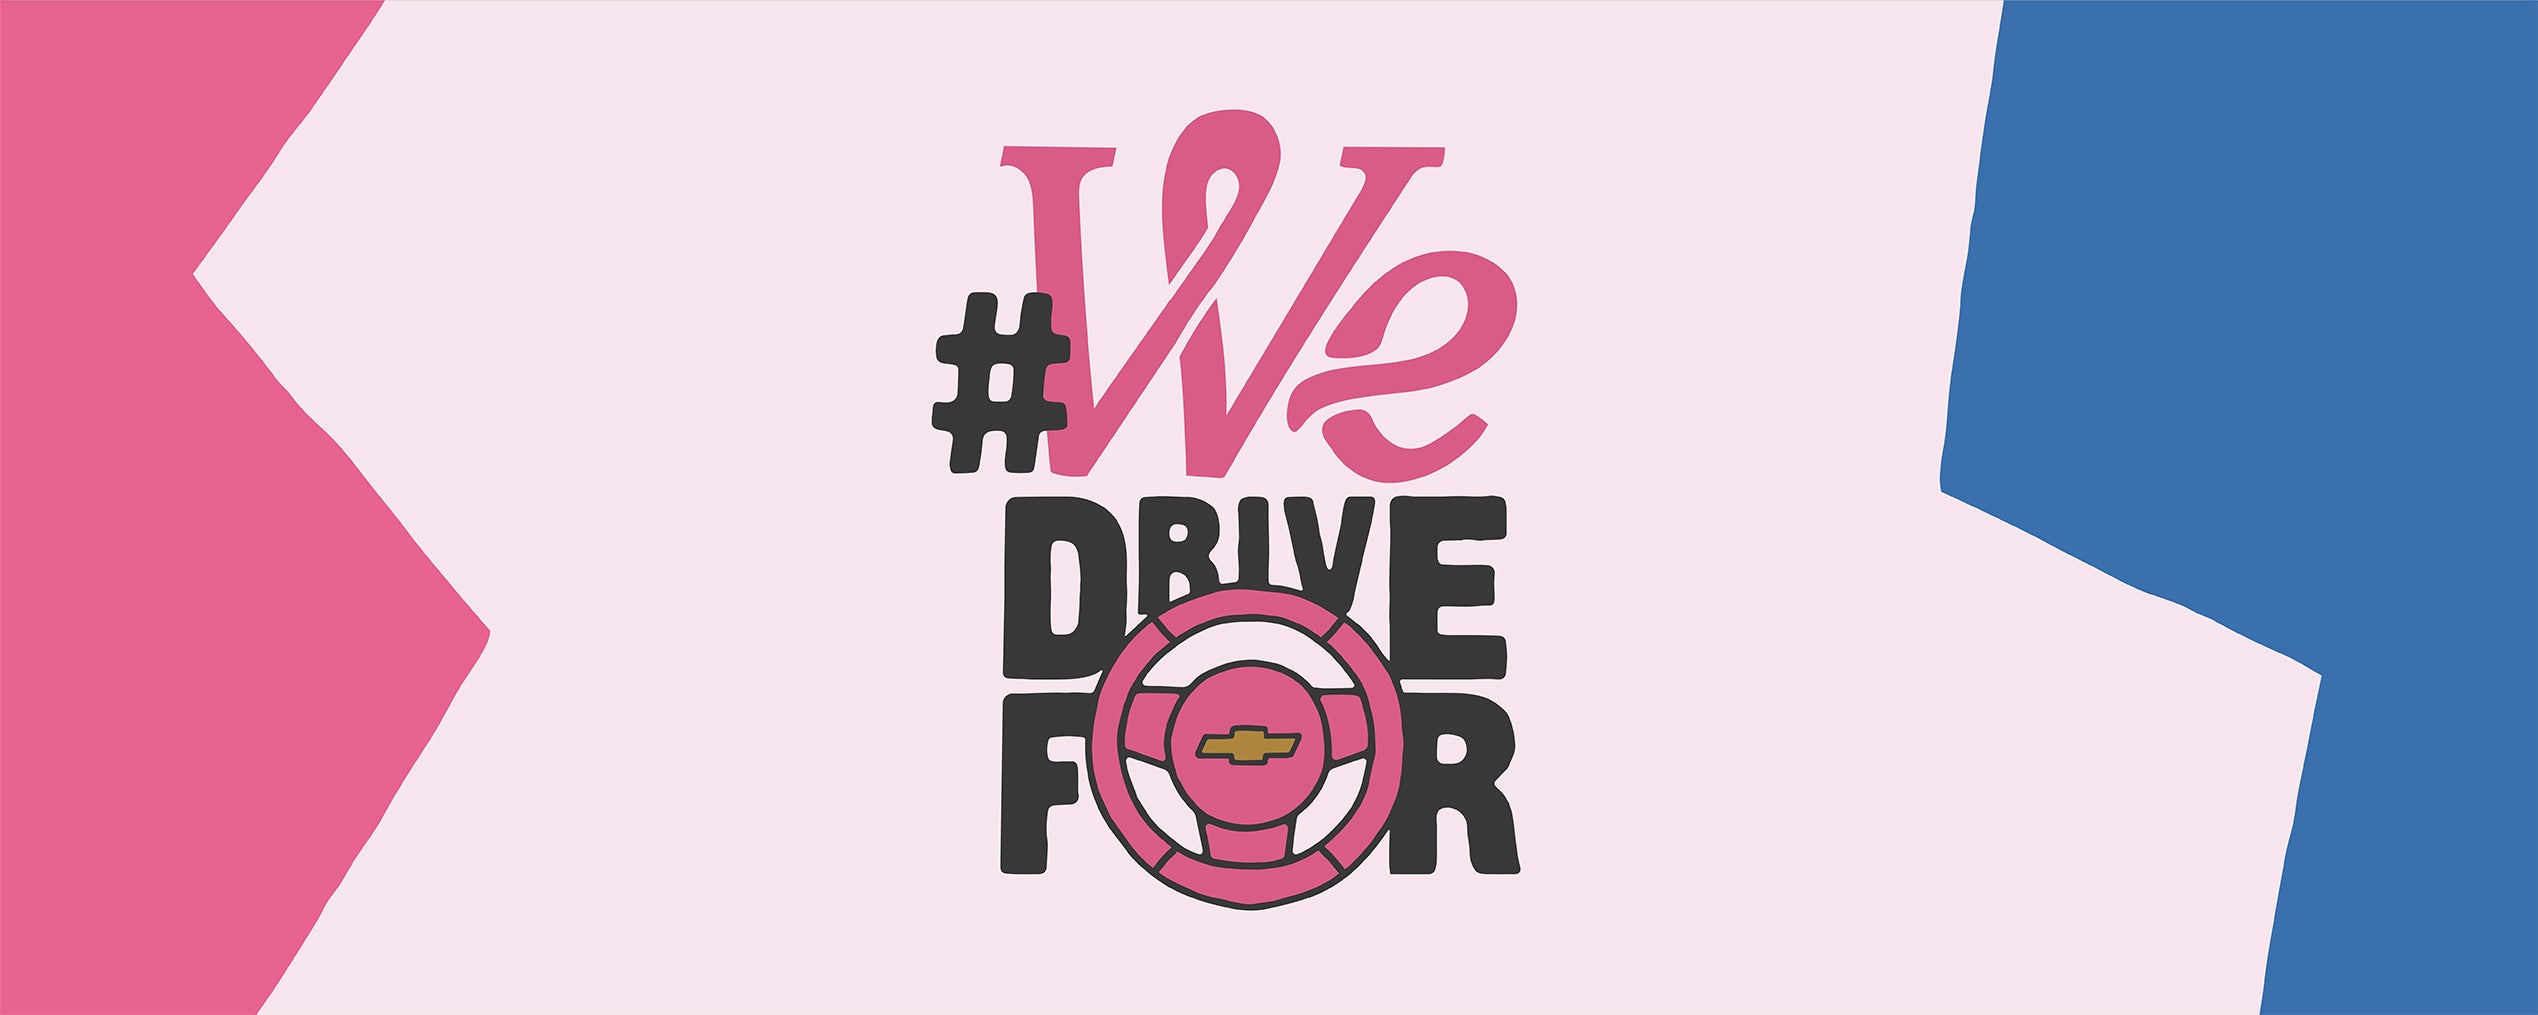 Chevy Cares - American Cancer Society #WeDriveFor
